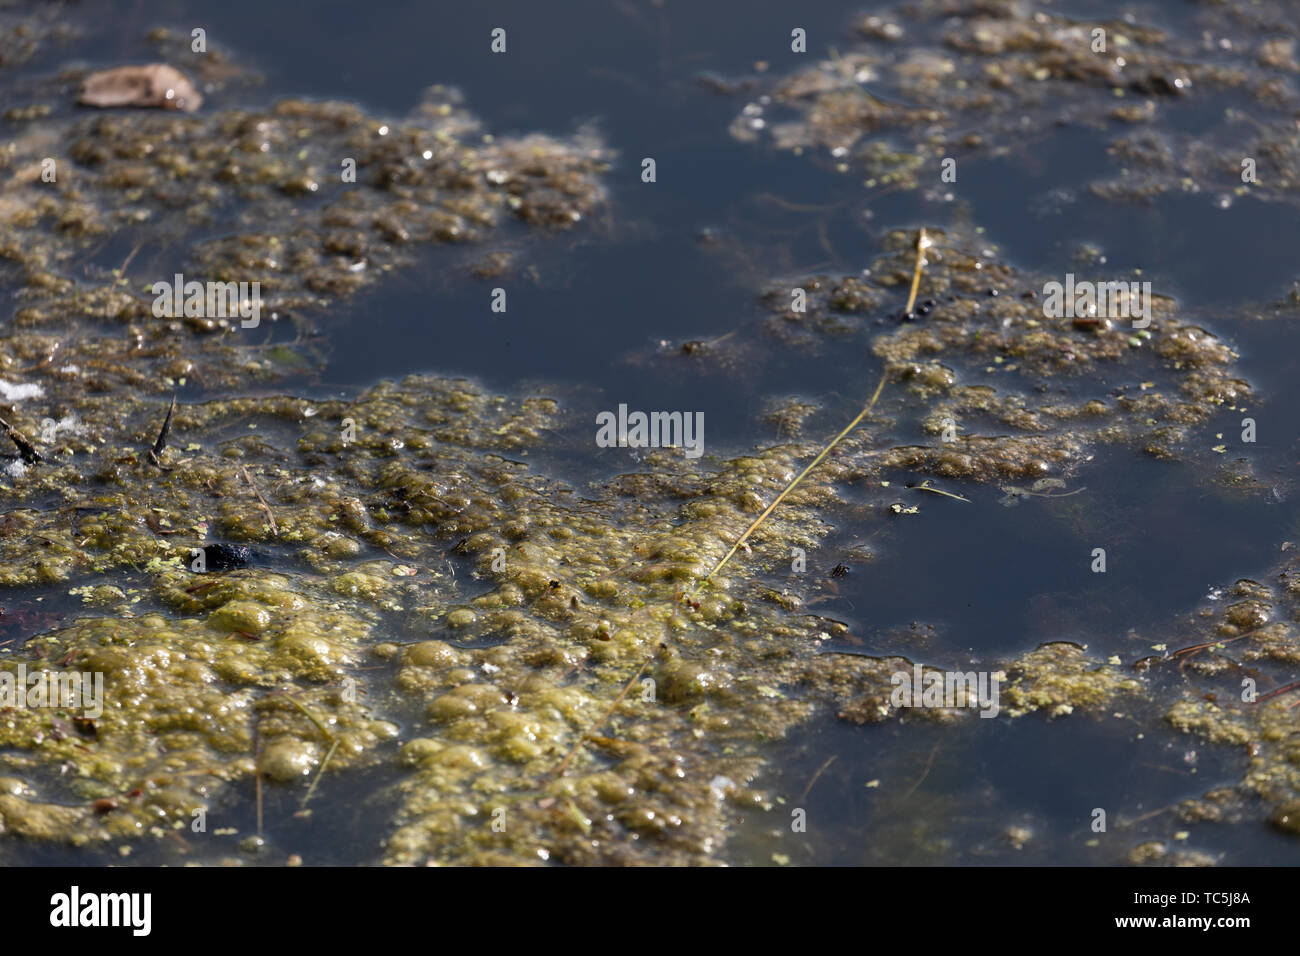 Algae Bloom on the surface of a lake Stock Photo